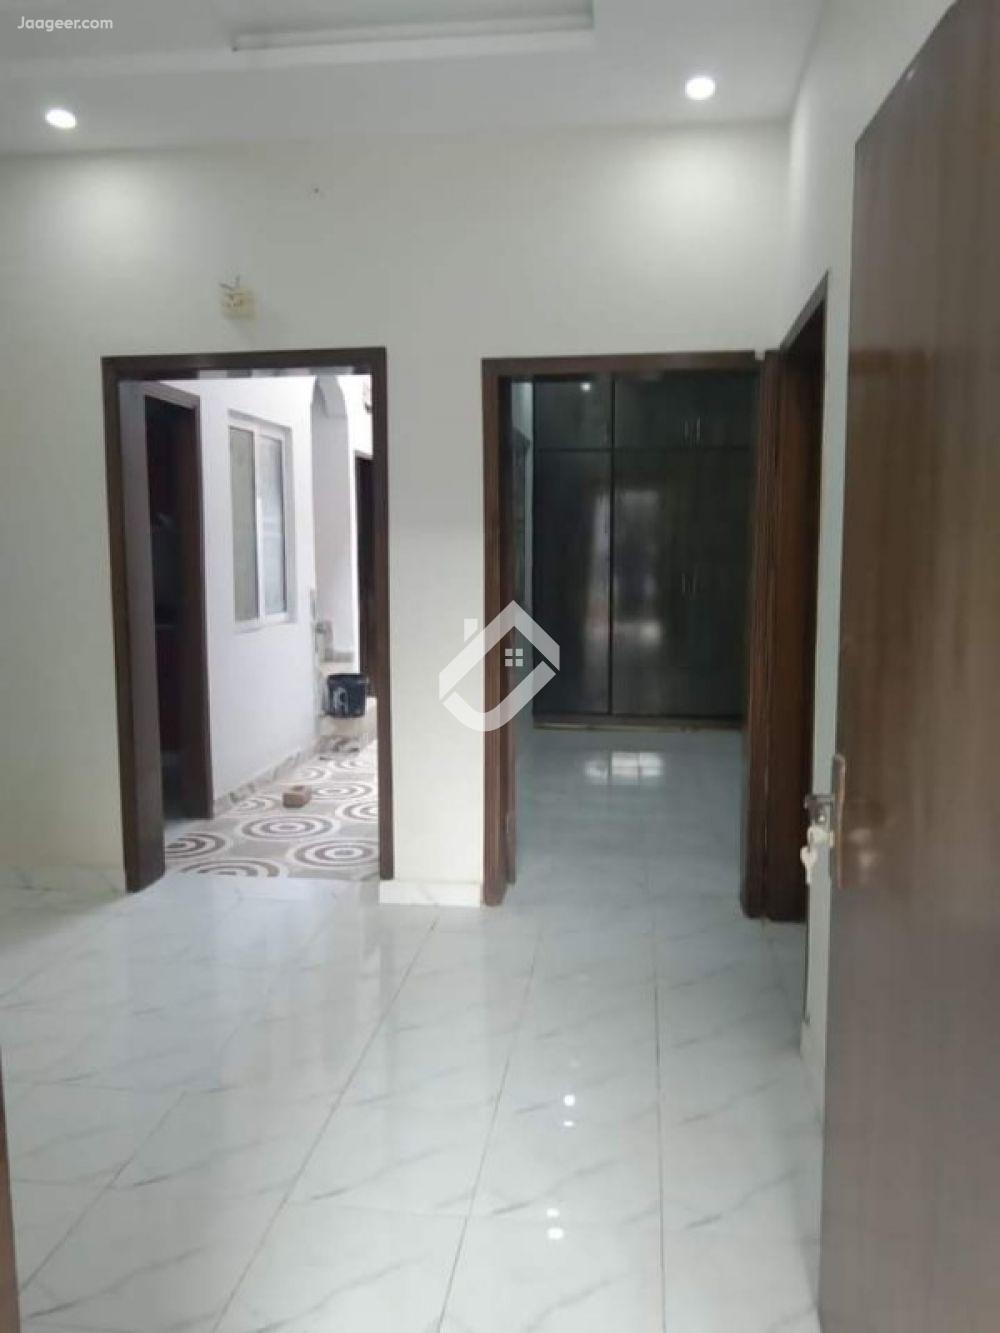 View  5 Marla Double Storey House For Sale In Taj Bagh Housing Society  in Taj Bagh Housing Society, Lahore